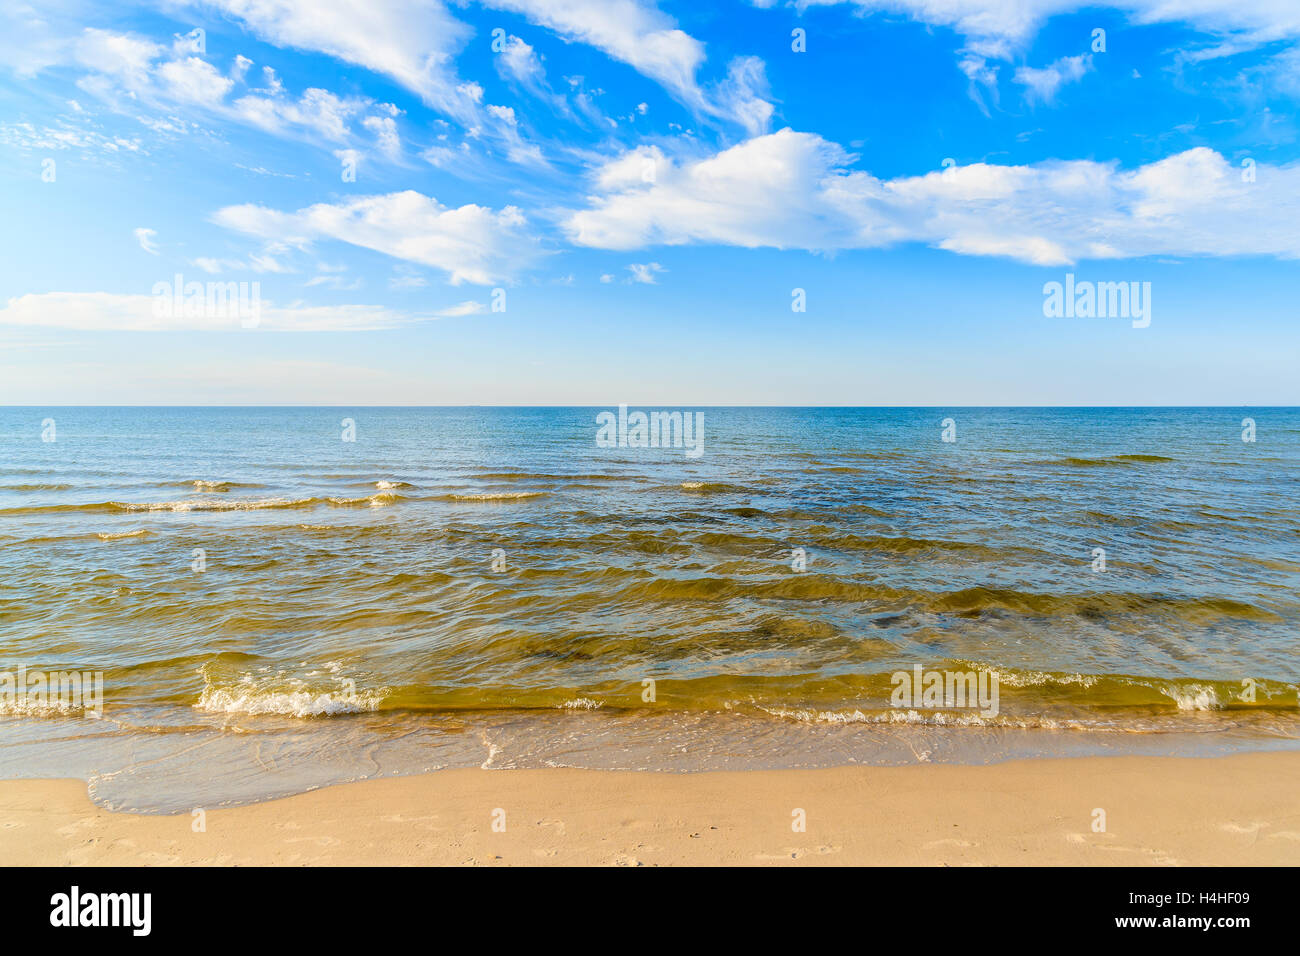 Sea waves on sandy beach and white sunny clouds on blue sky in Debki village, Baltic Sea, Poland Stock Photo